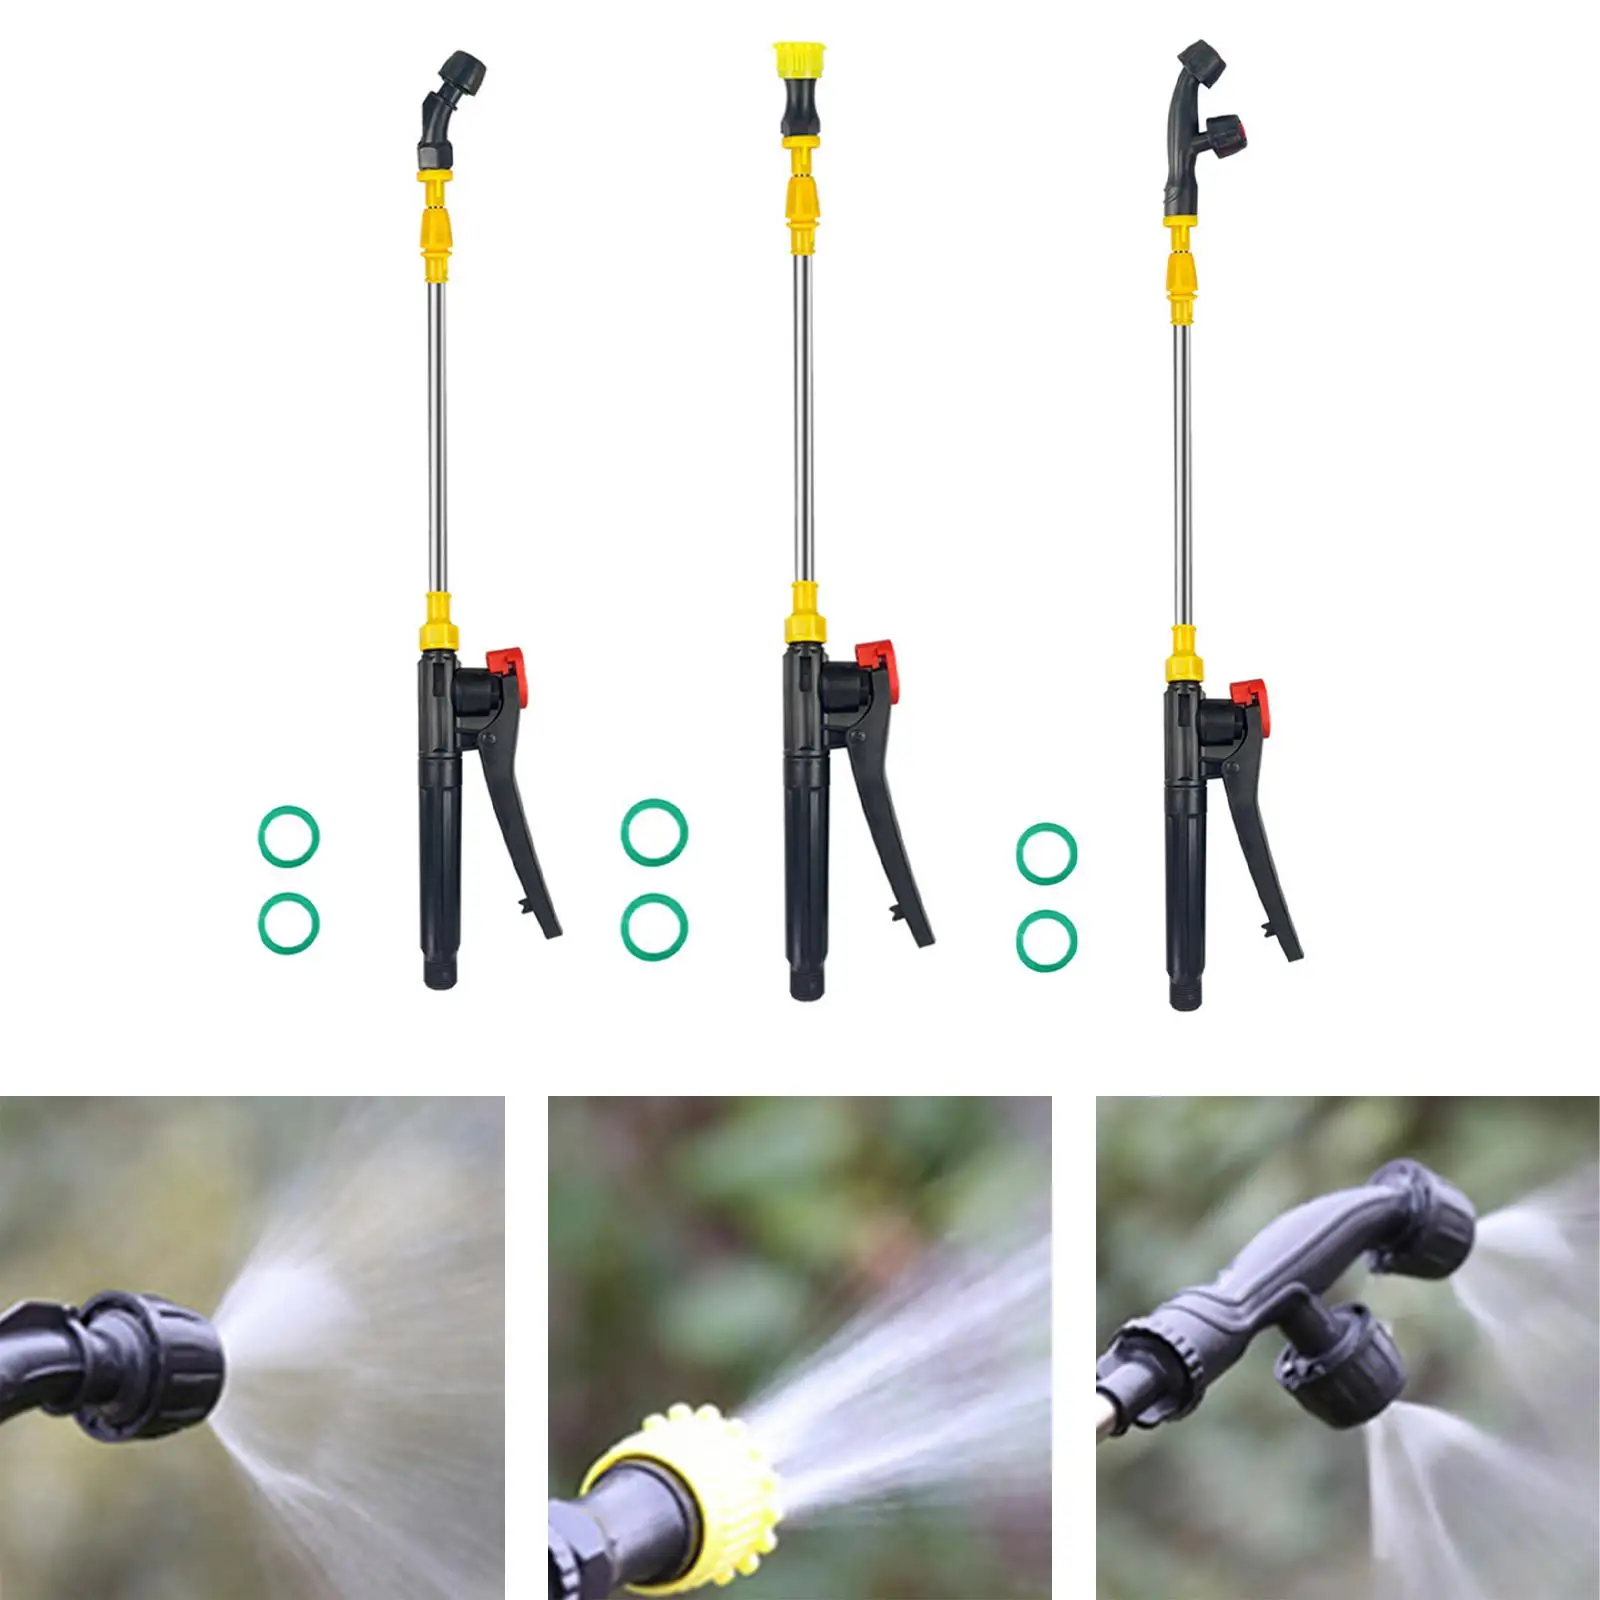 Retractable Sprayer Rod 45-80cm Sprayer Extension Pole Rod Nozzle and Handle for